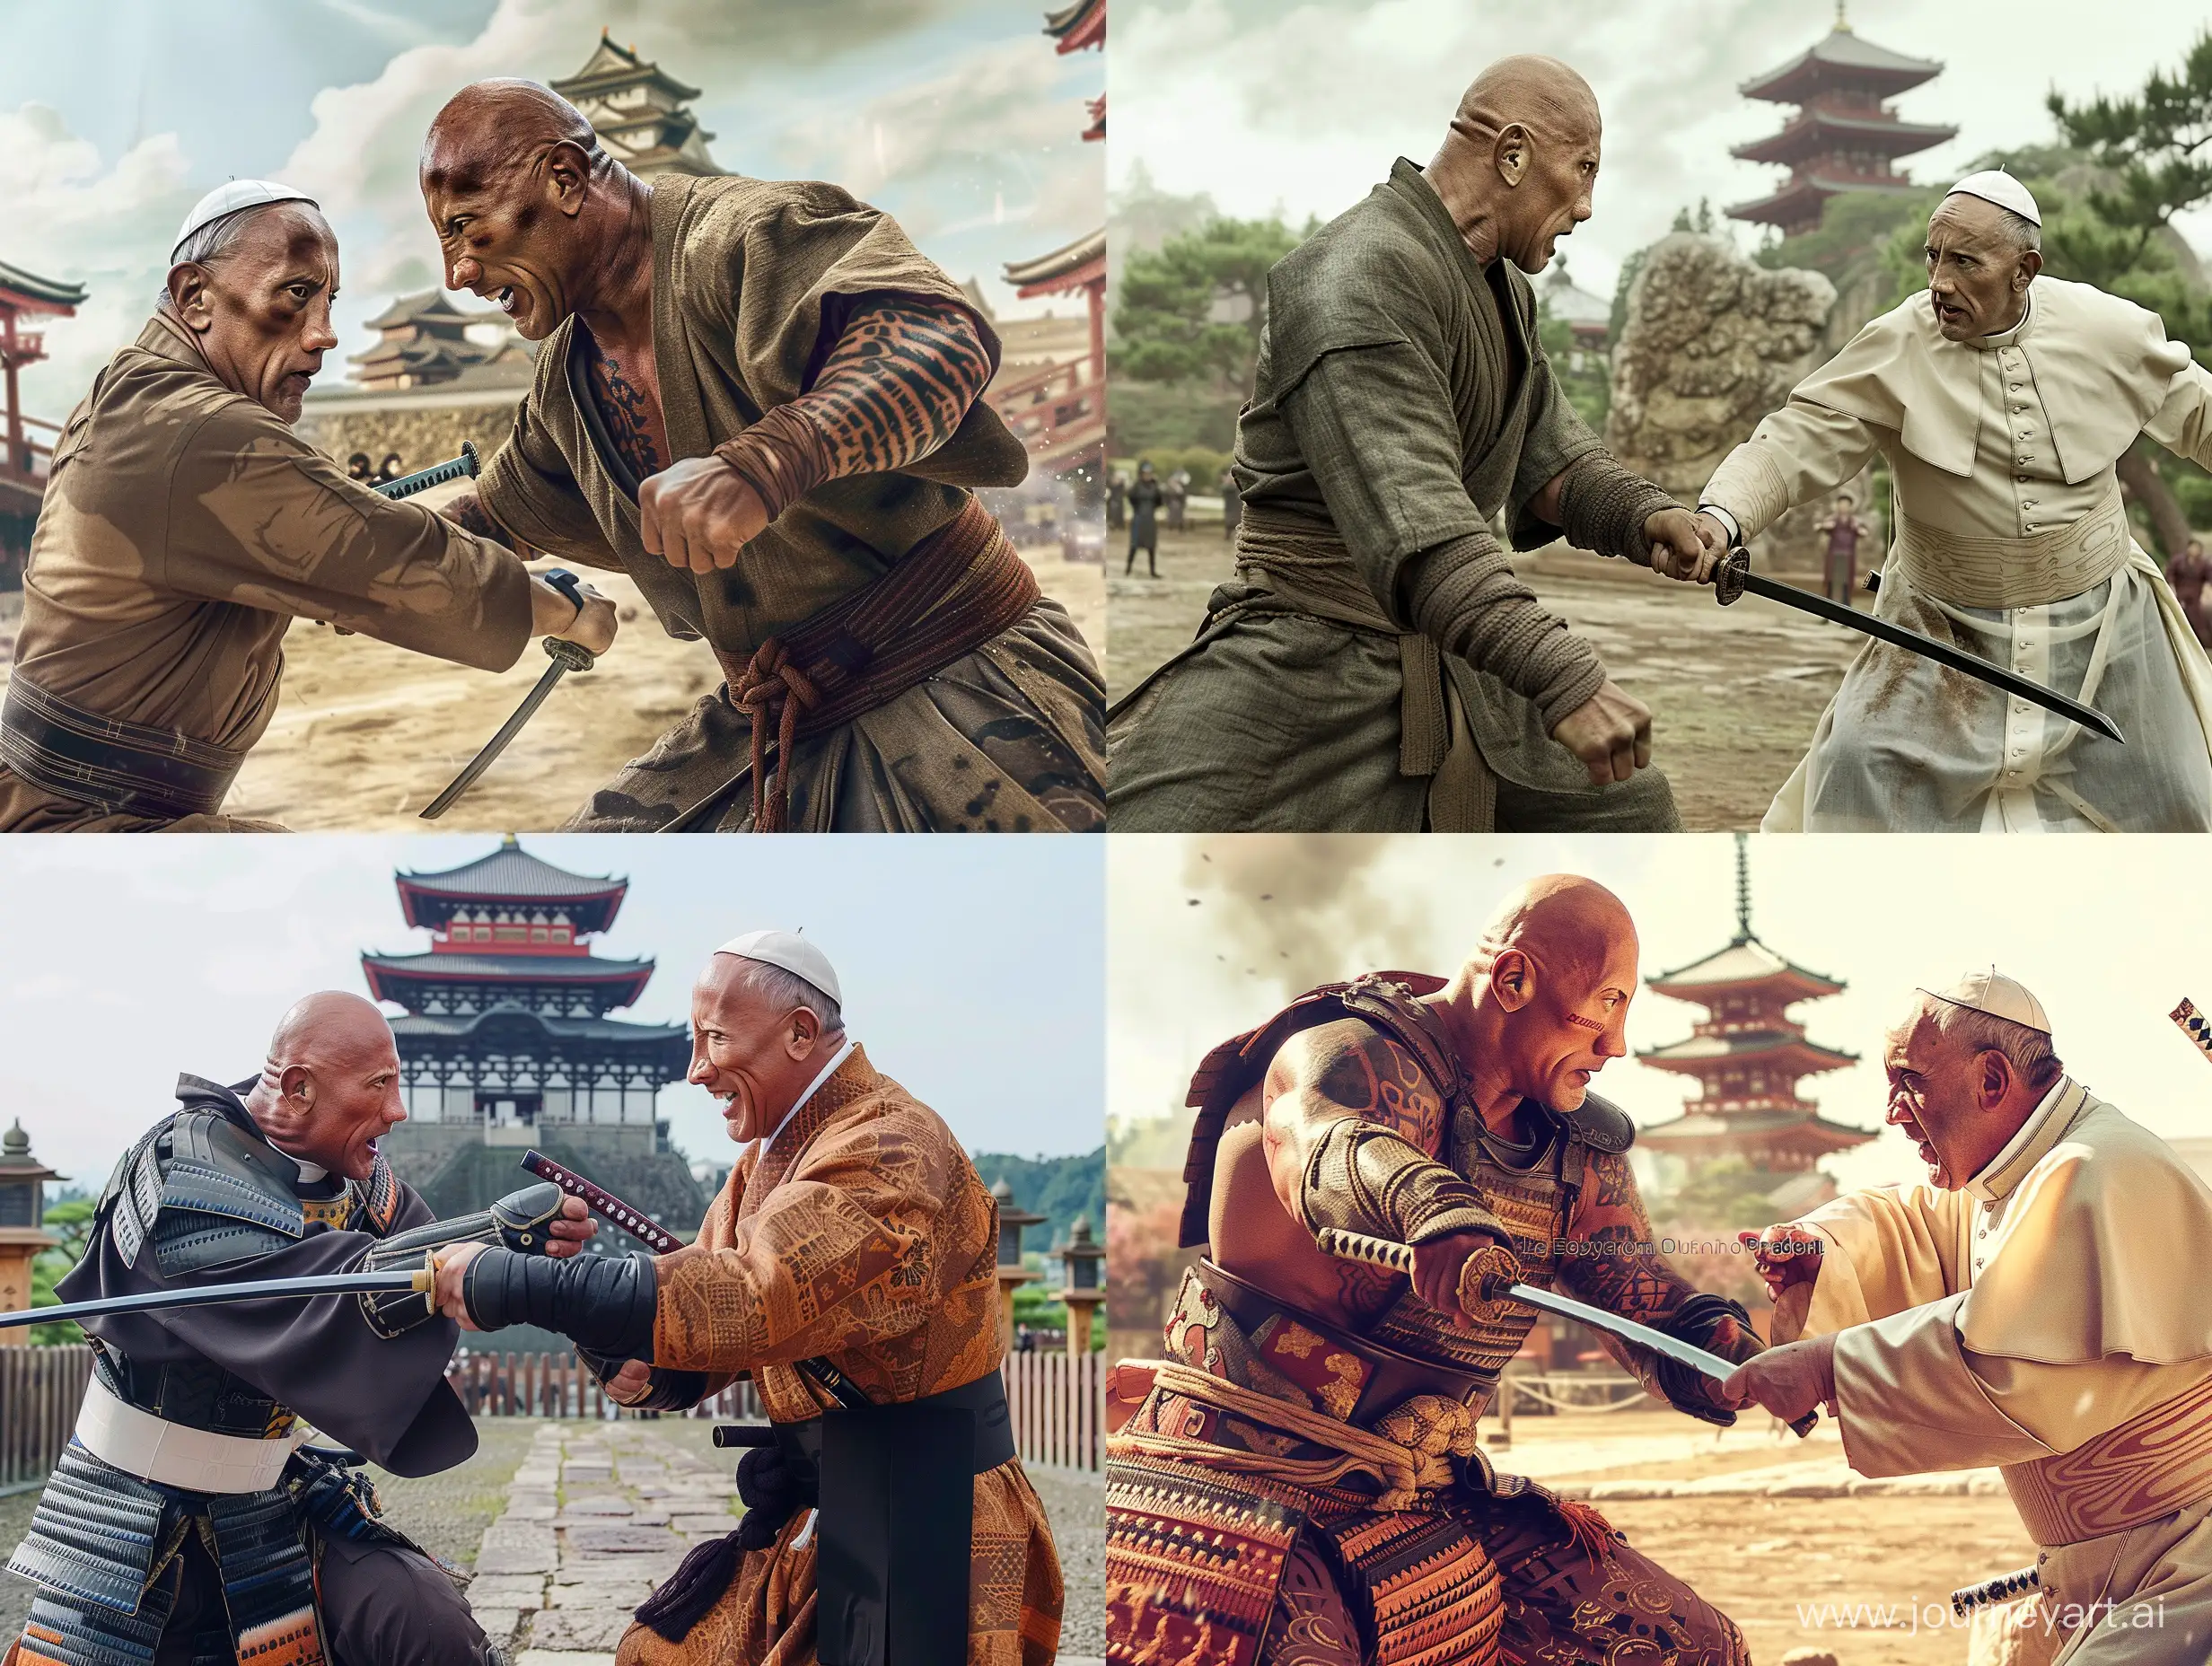 Dwayne-Johnson-Samurai-Battle-with-Pope-Francis-in-Old-Japan